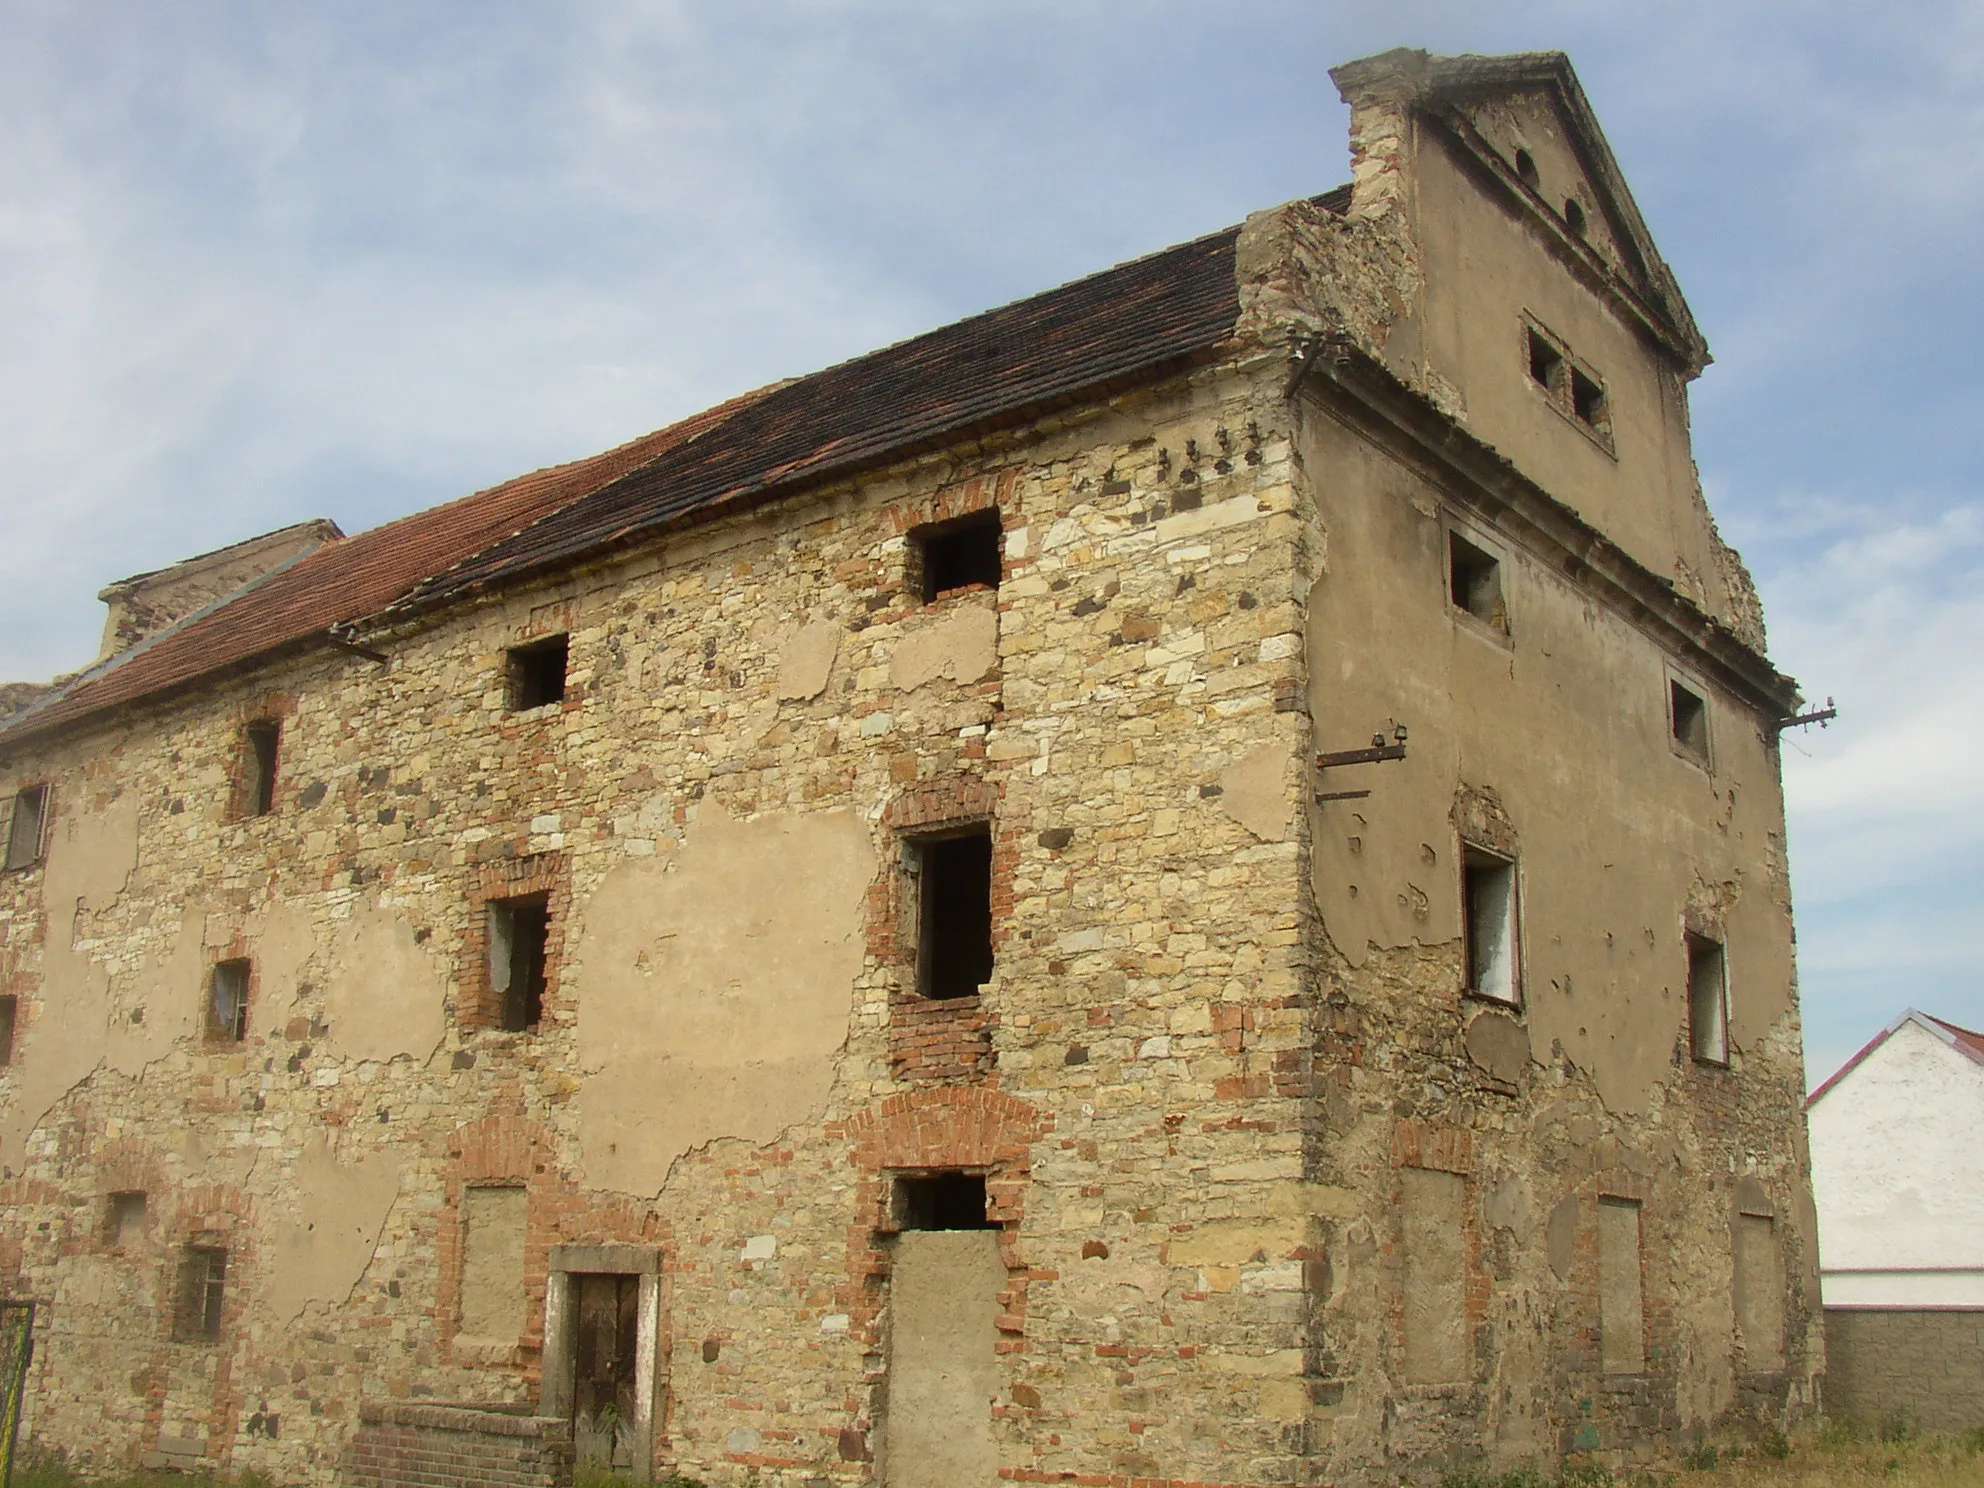 Photo showing: Mlékojedy, Litoměřice District, Czech Republic. An old granary fallen into disrepair next to NW corner of the village square.